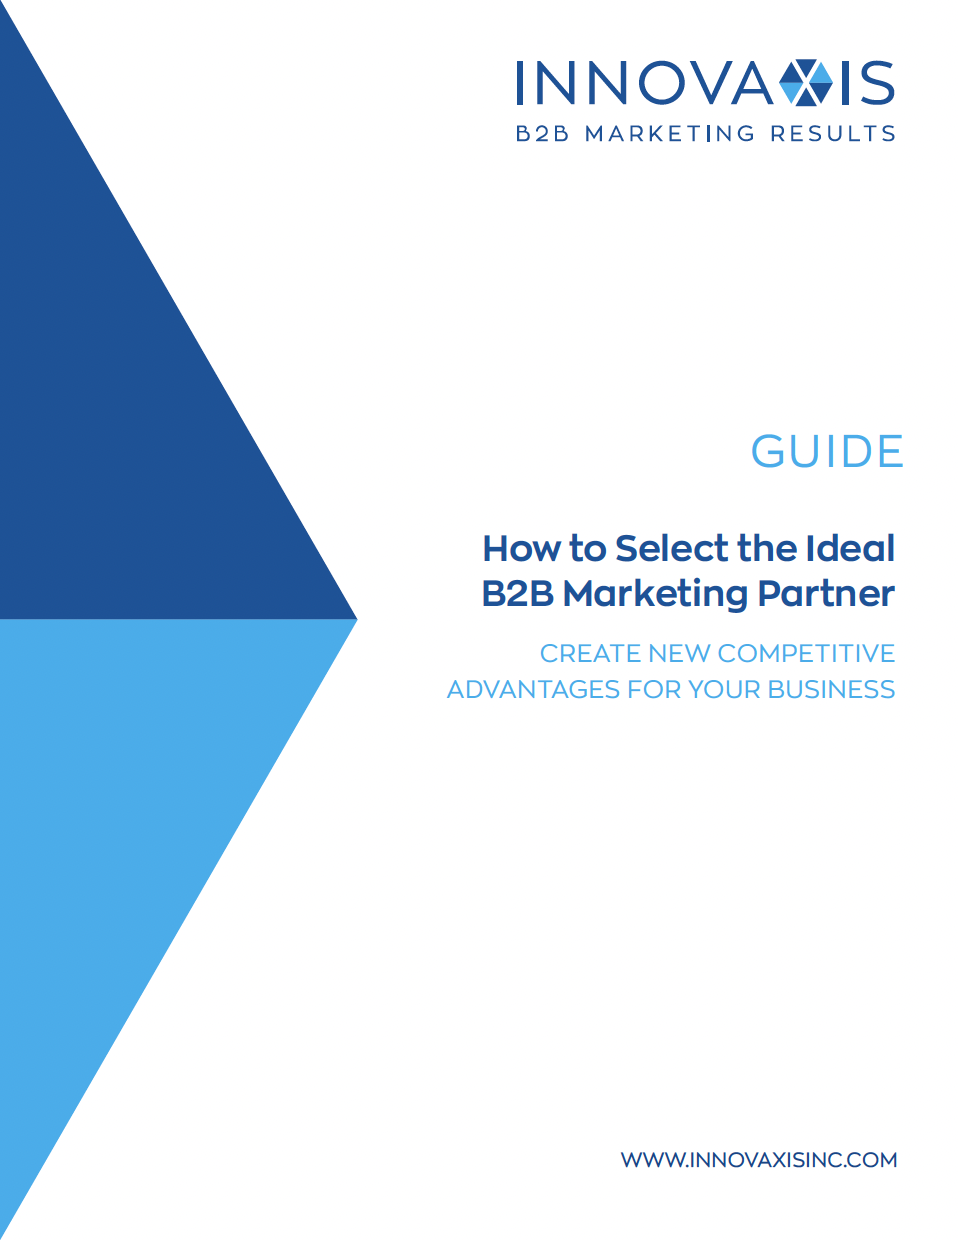 Innovaxis Guide: How to Select the Ideal B2B Marketing Partner